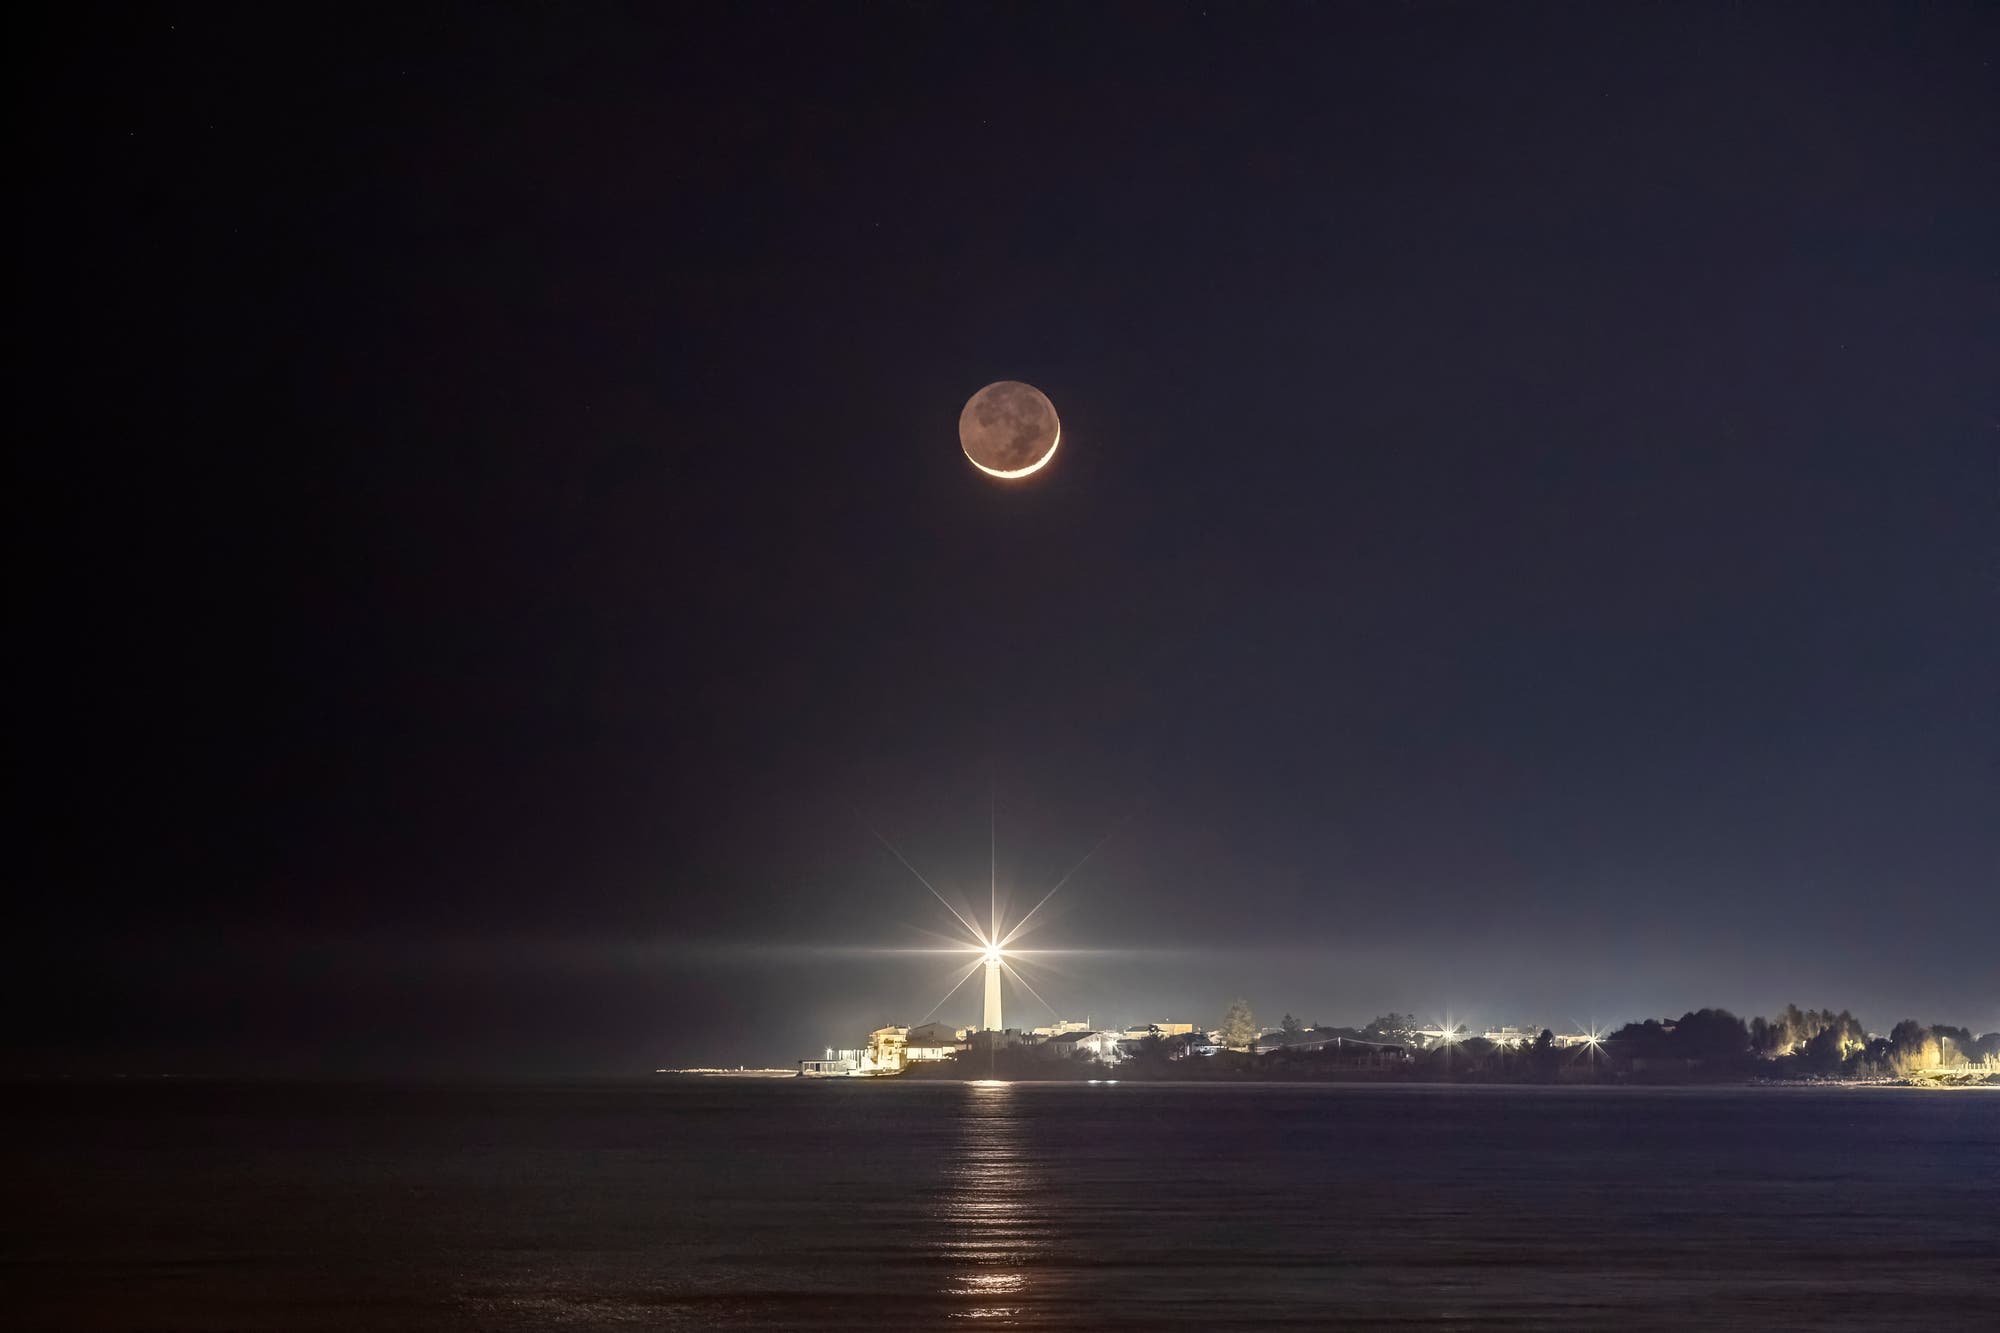 The Moon & the Lighthouse